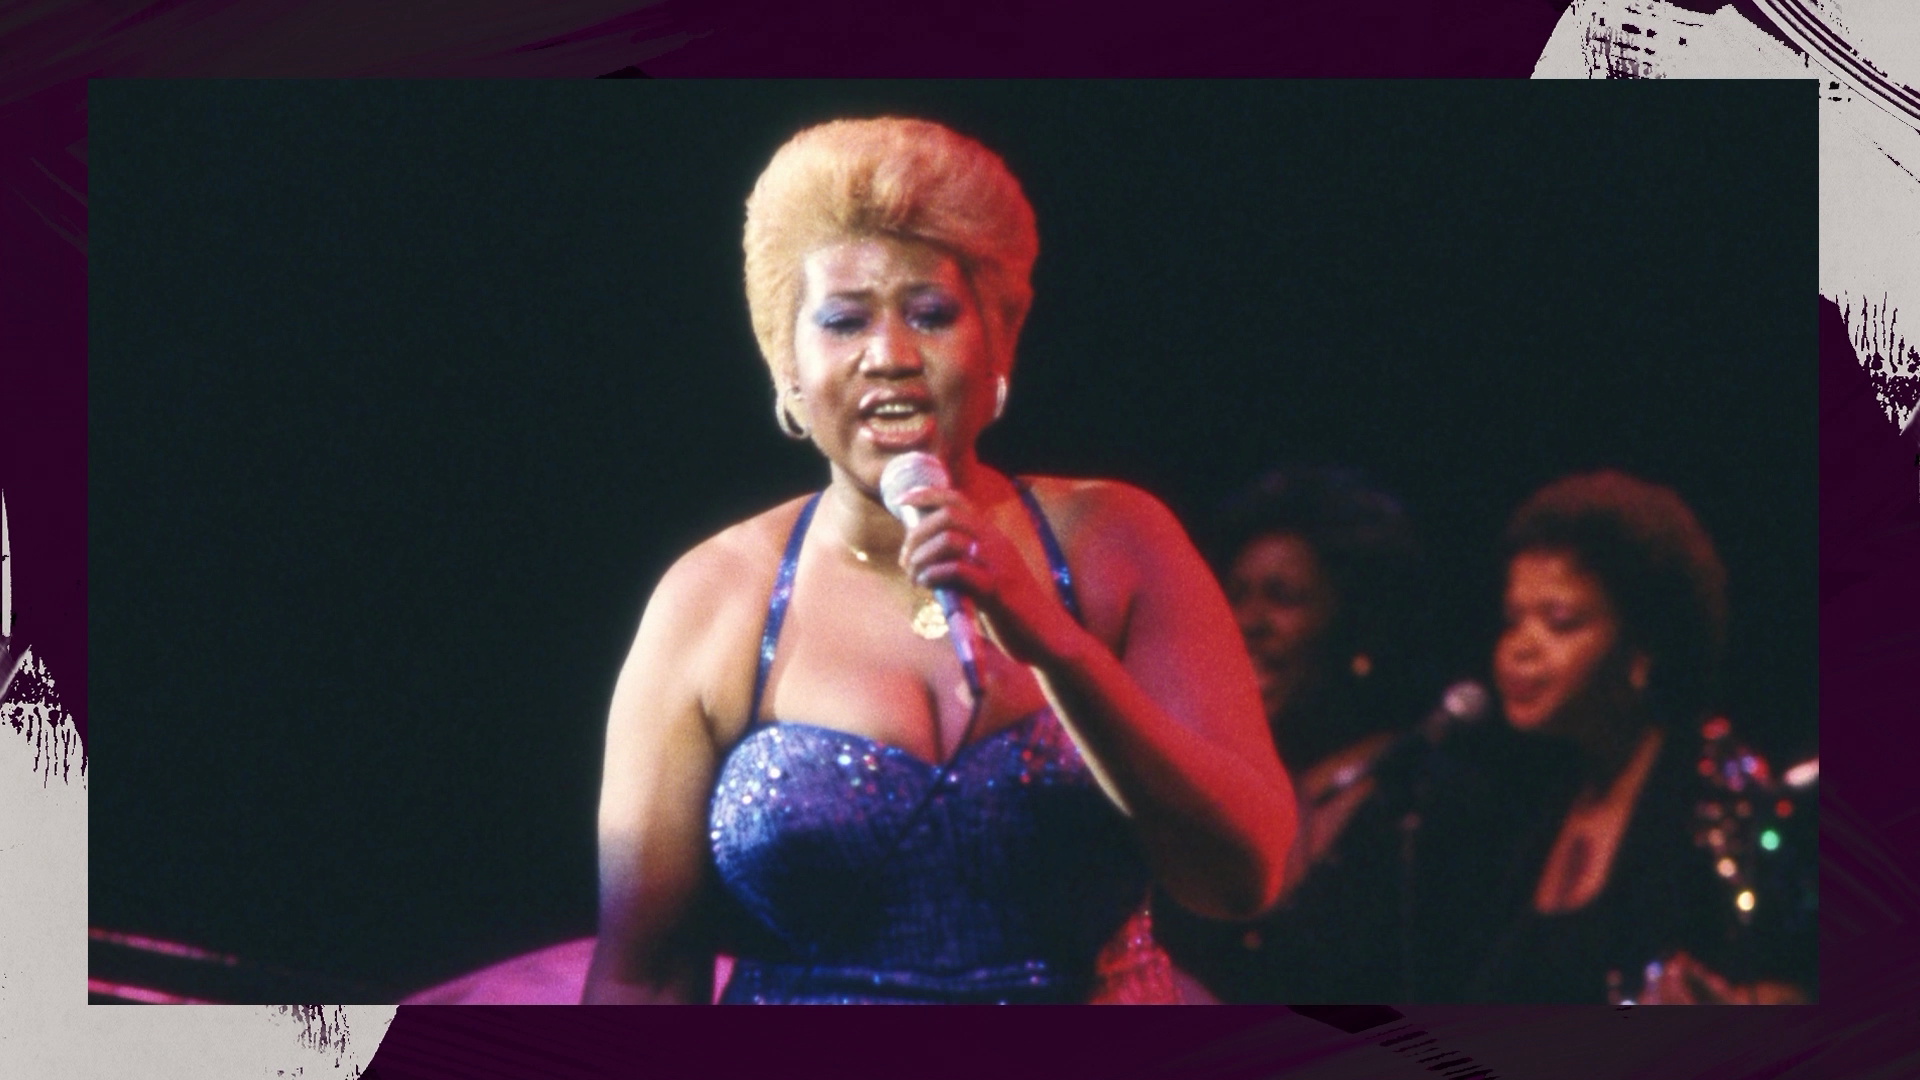 An image of singer Aretha Franklin.